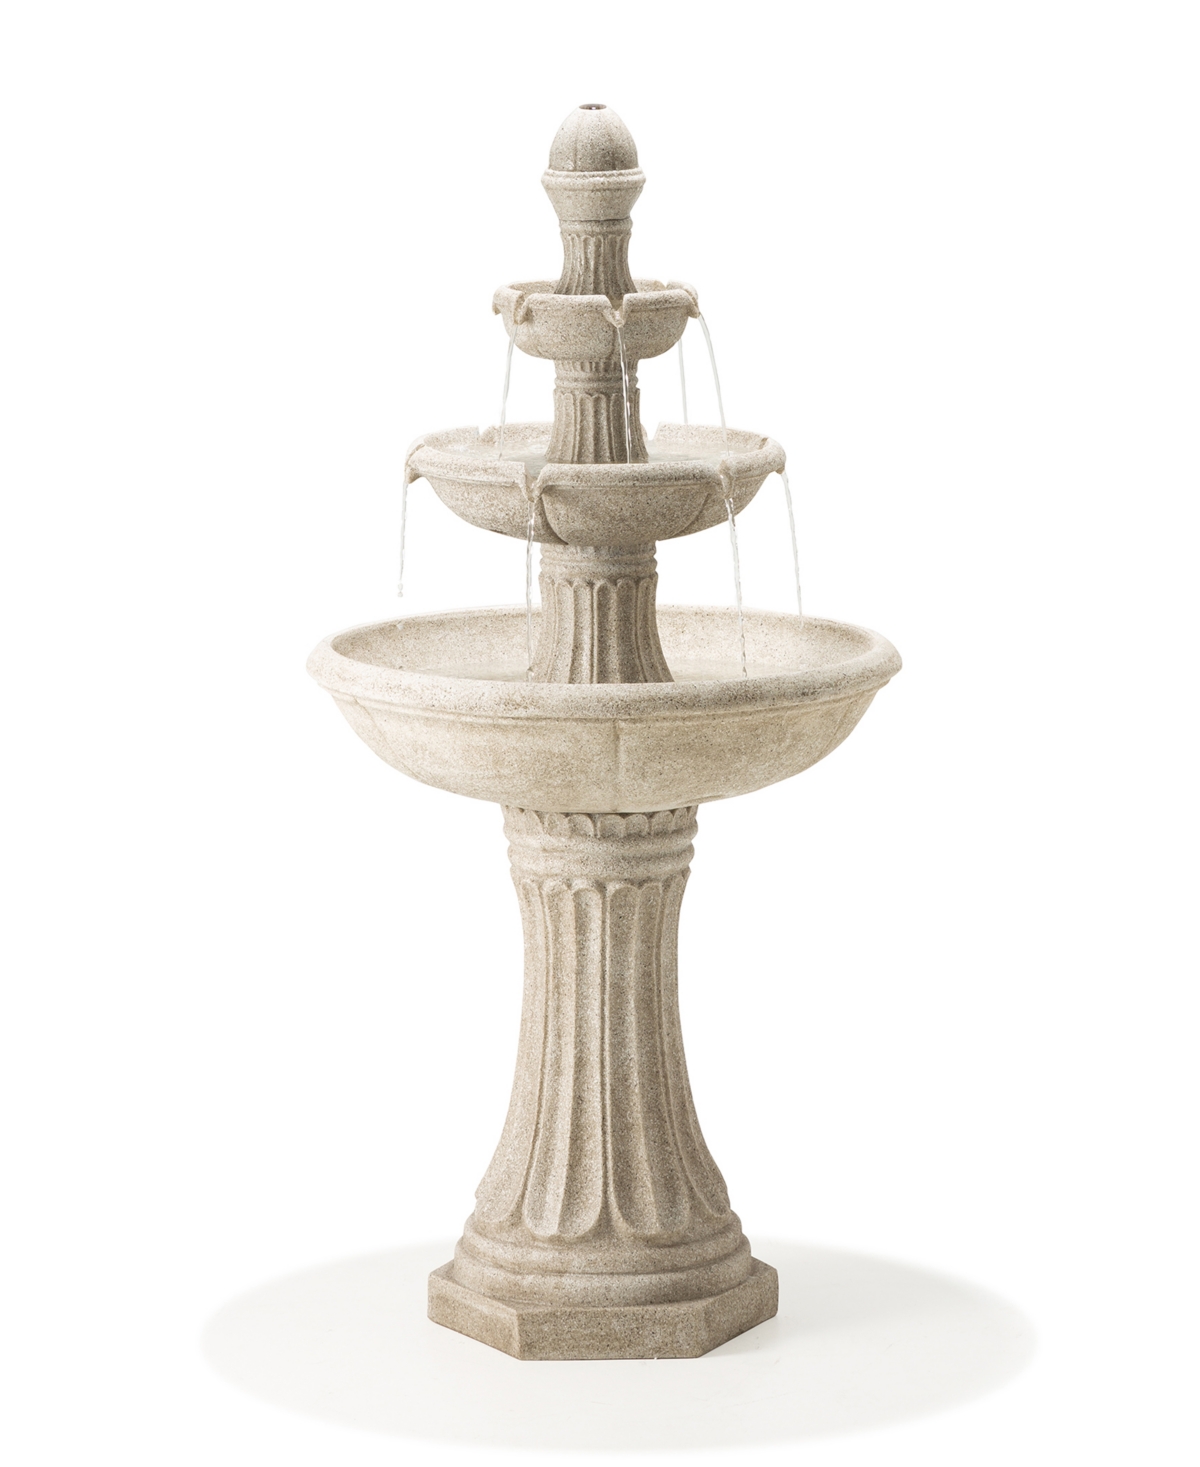 Glitzhome Oversized Terrazzo Resin 3 Tier Outdoor With Pump And Light Fountain, 47.25" Height In Beige